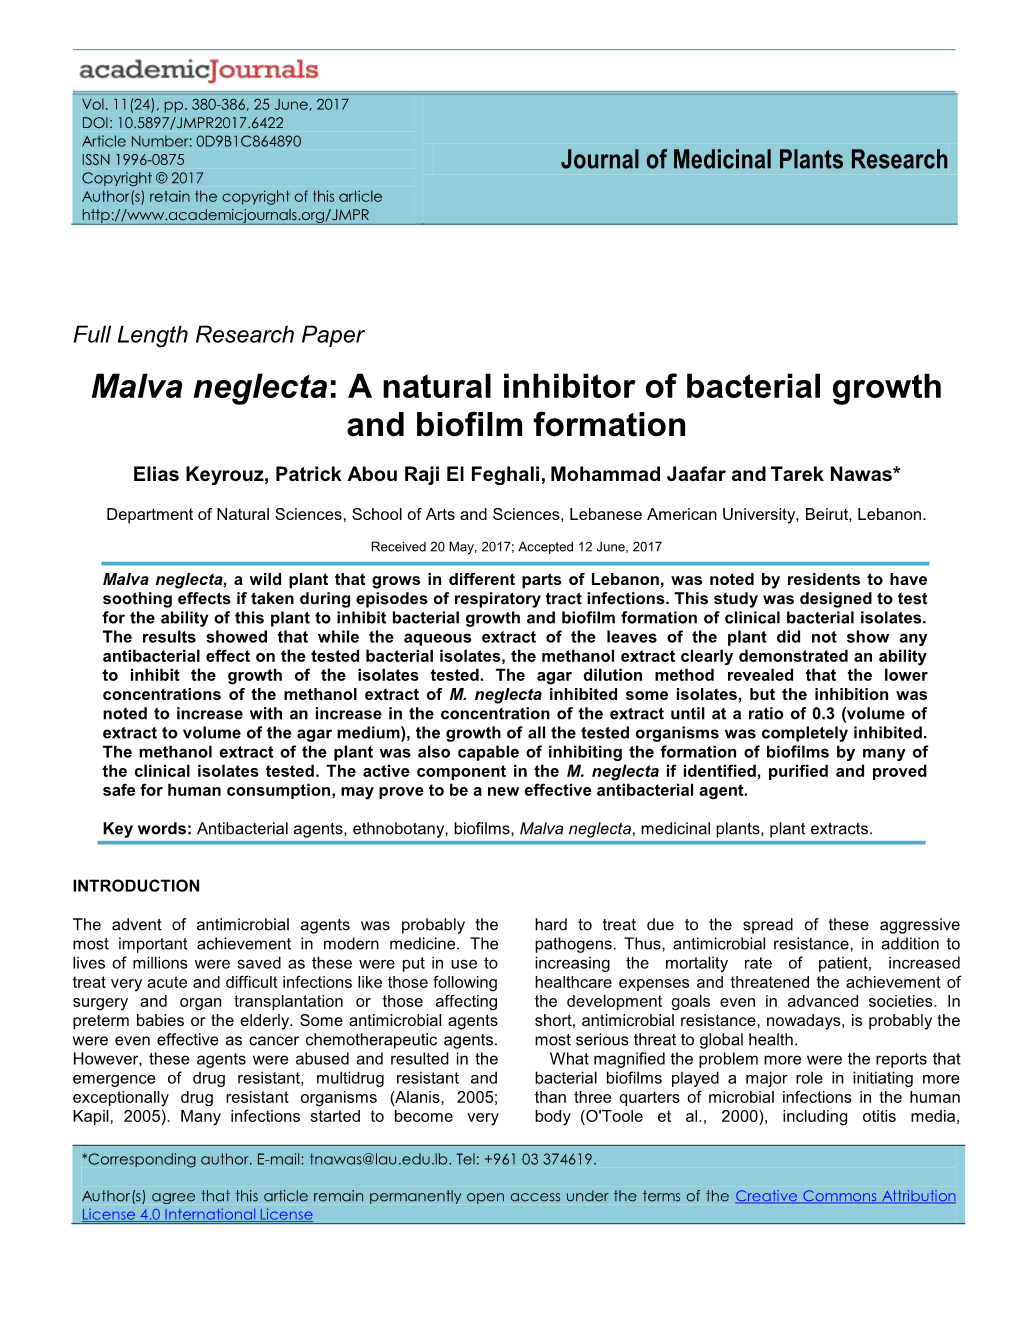 Malva Neglecta: a Natural Inhibitor of Bacterial Growth and Biofilm Formation